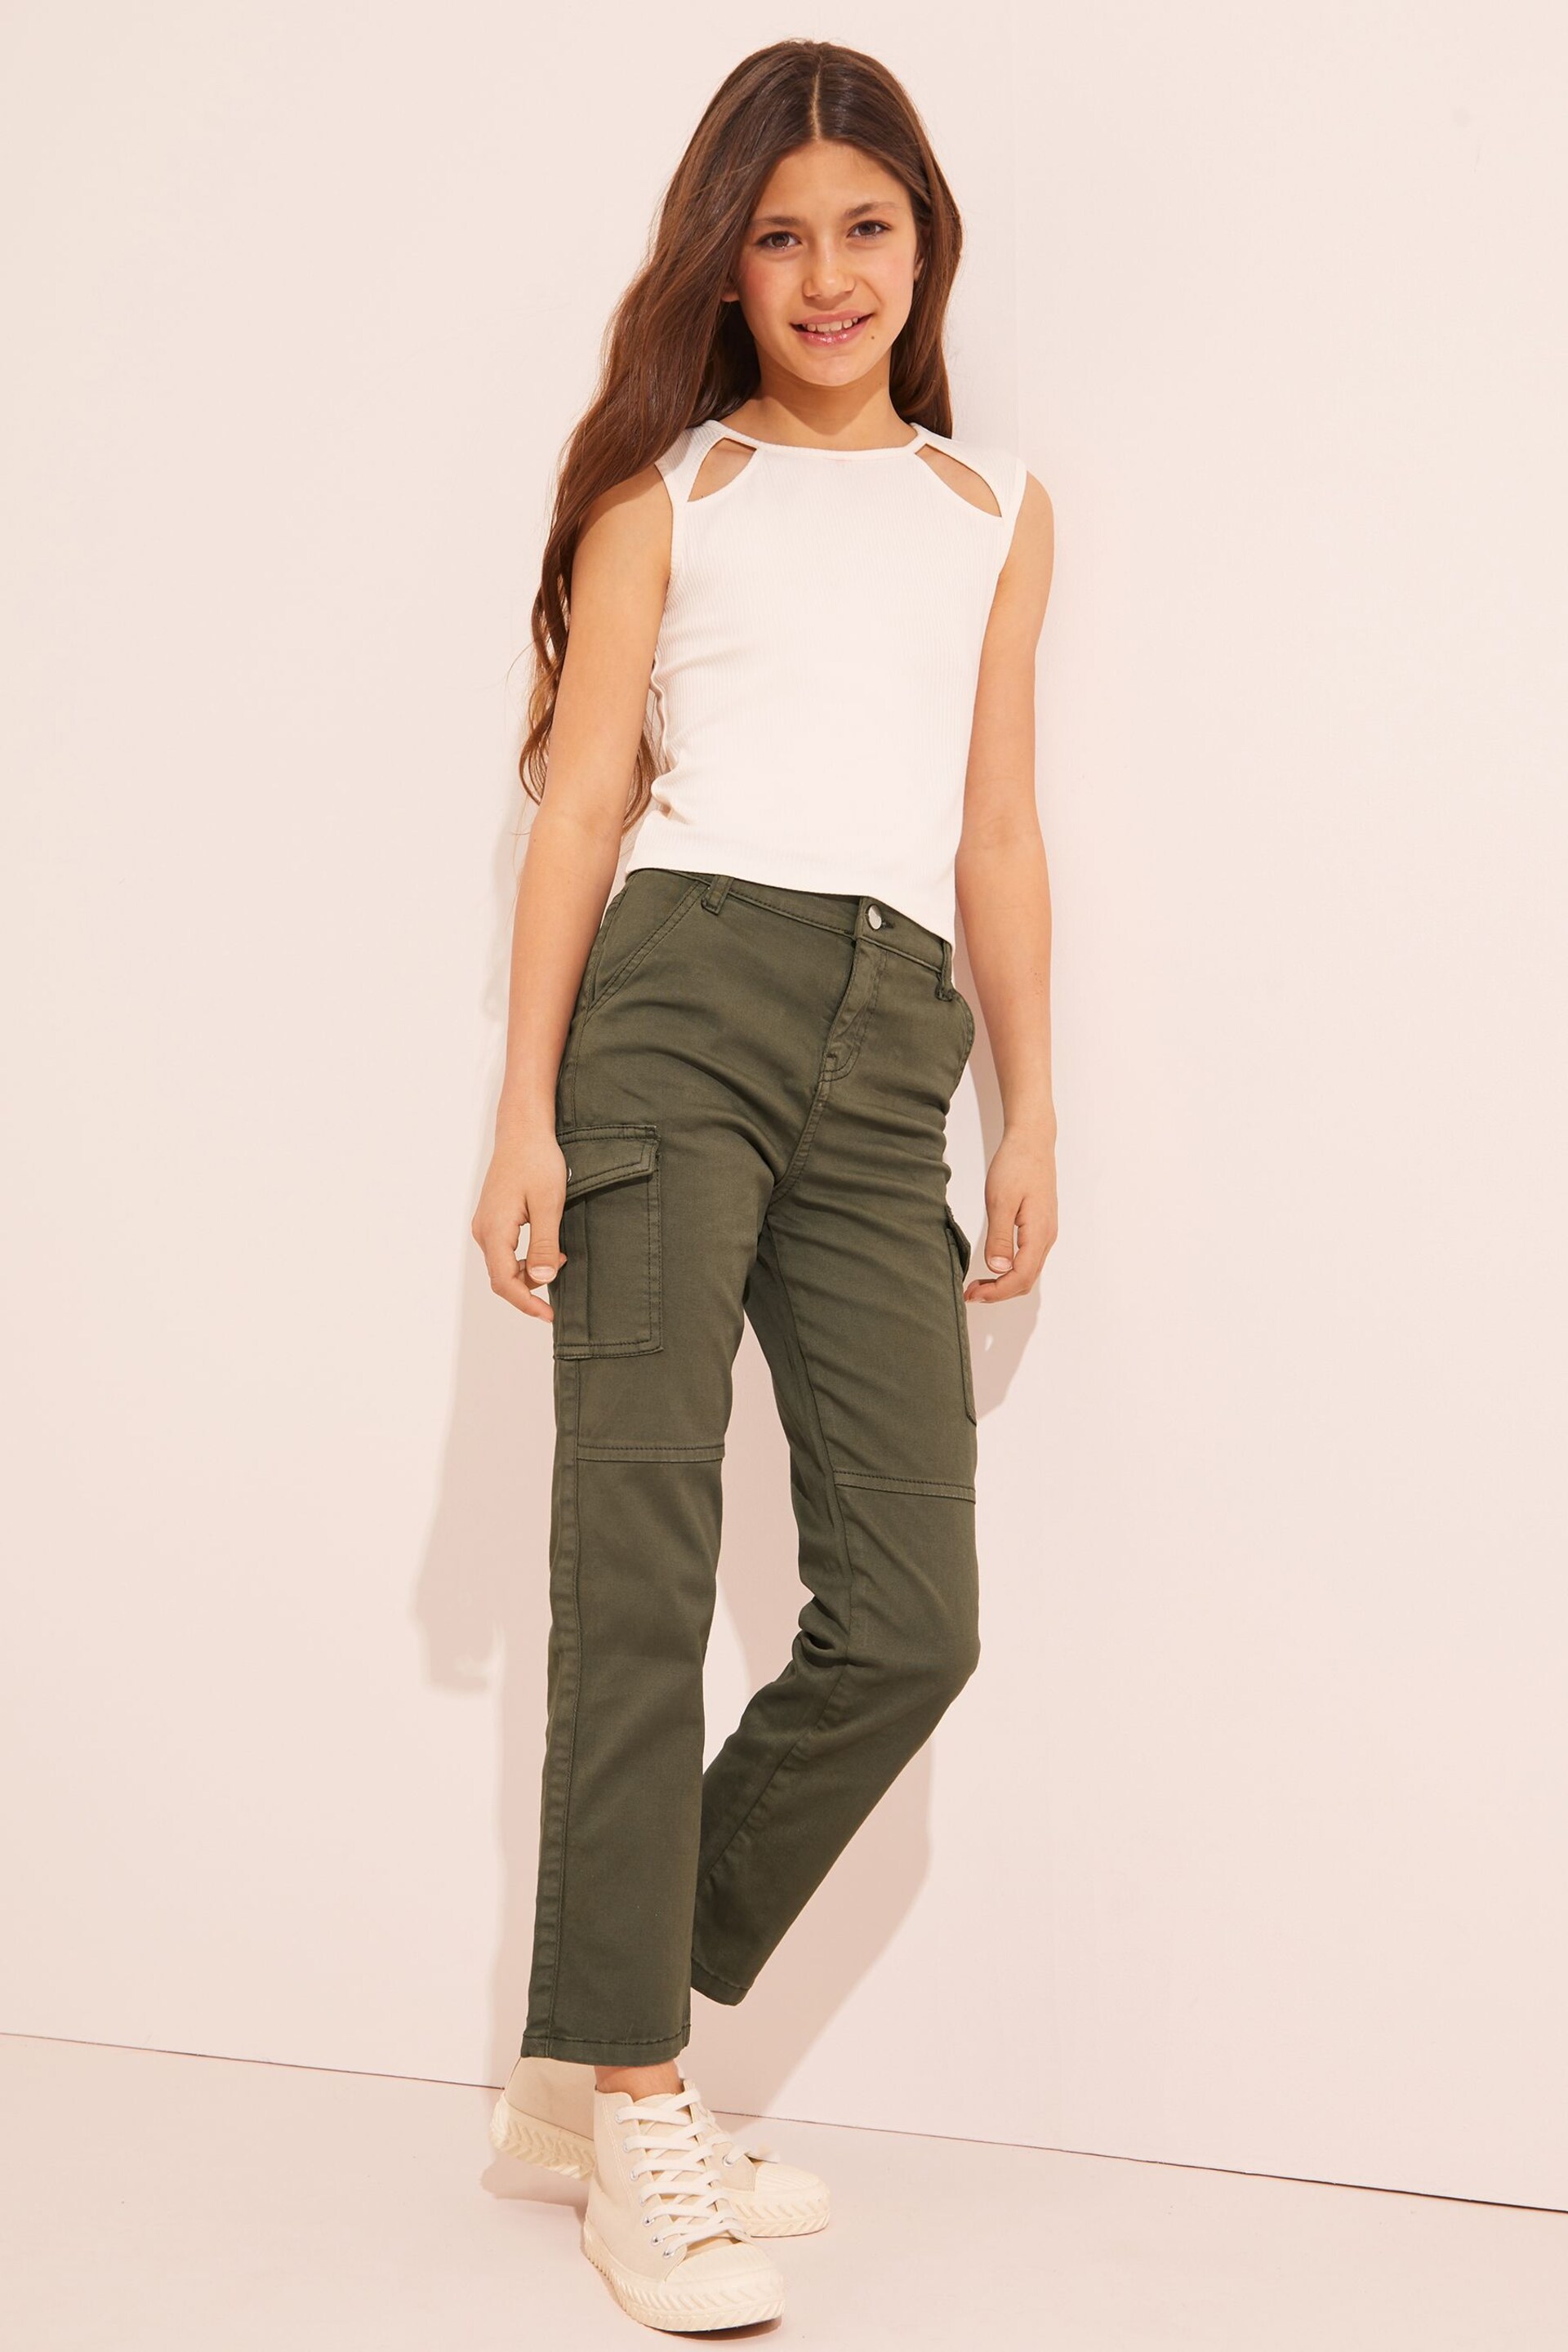 Lipsy Khaki Green Cargo Trousers (From 2-16yrs) - Image 2 of 4